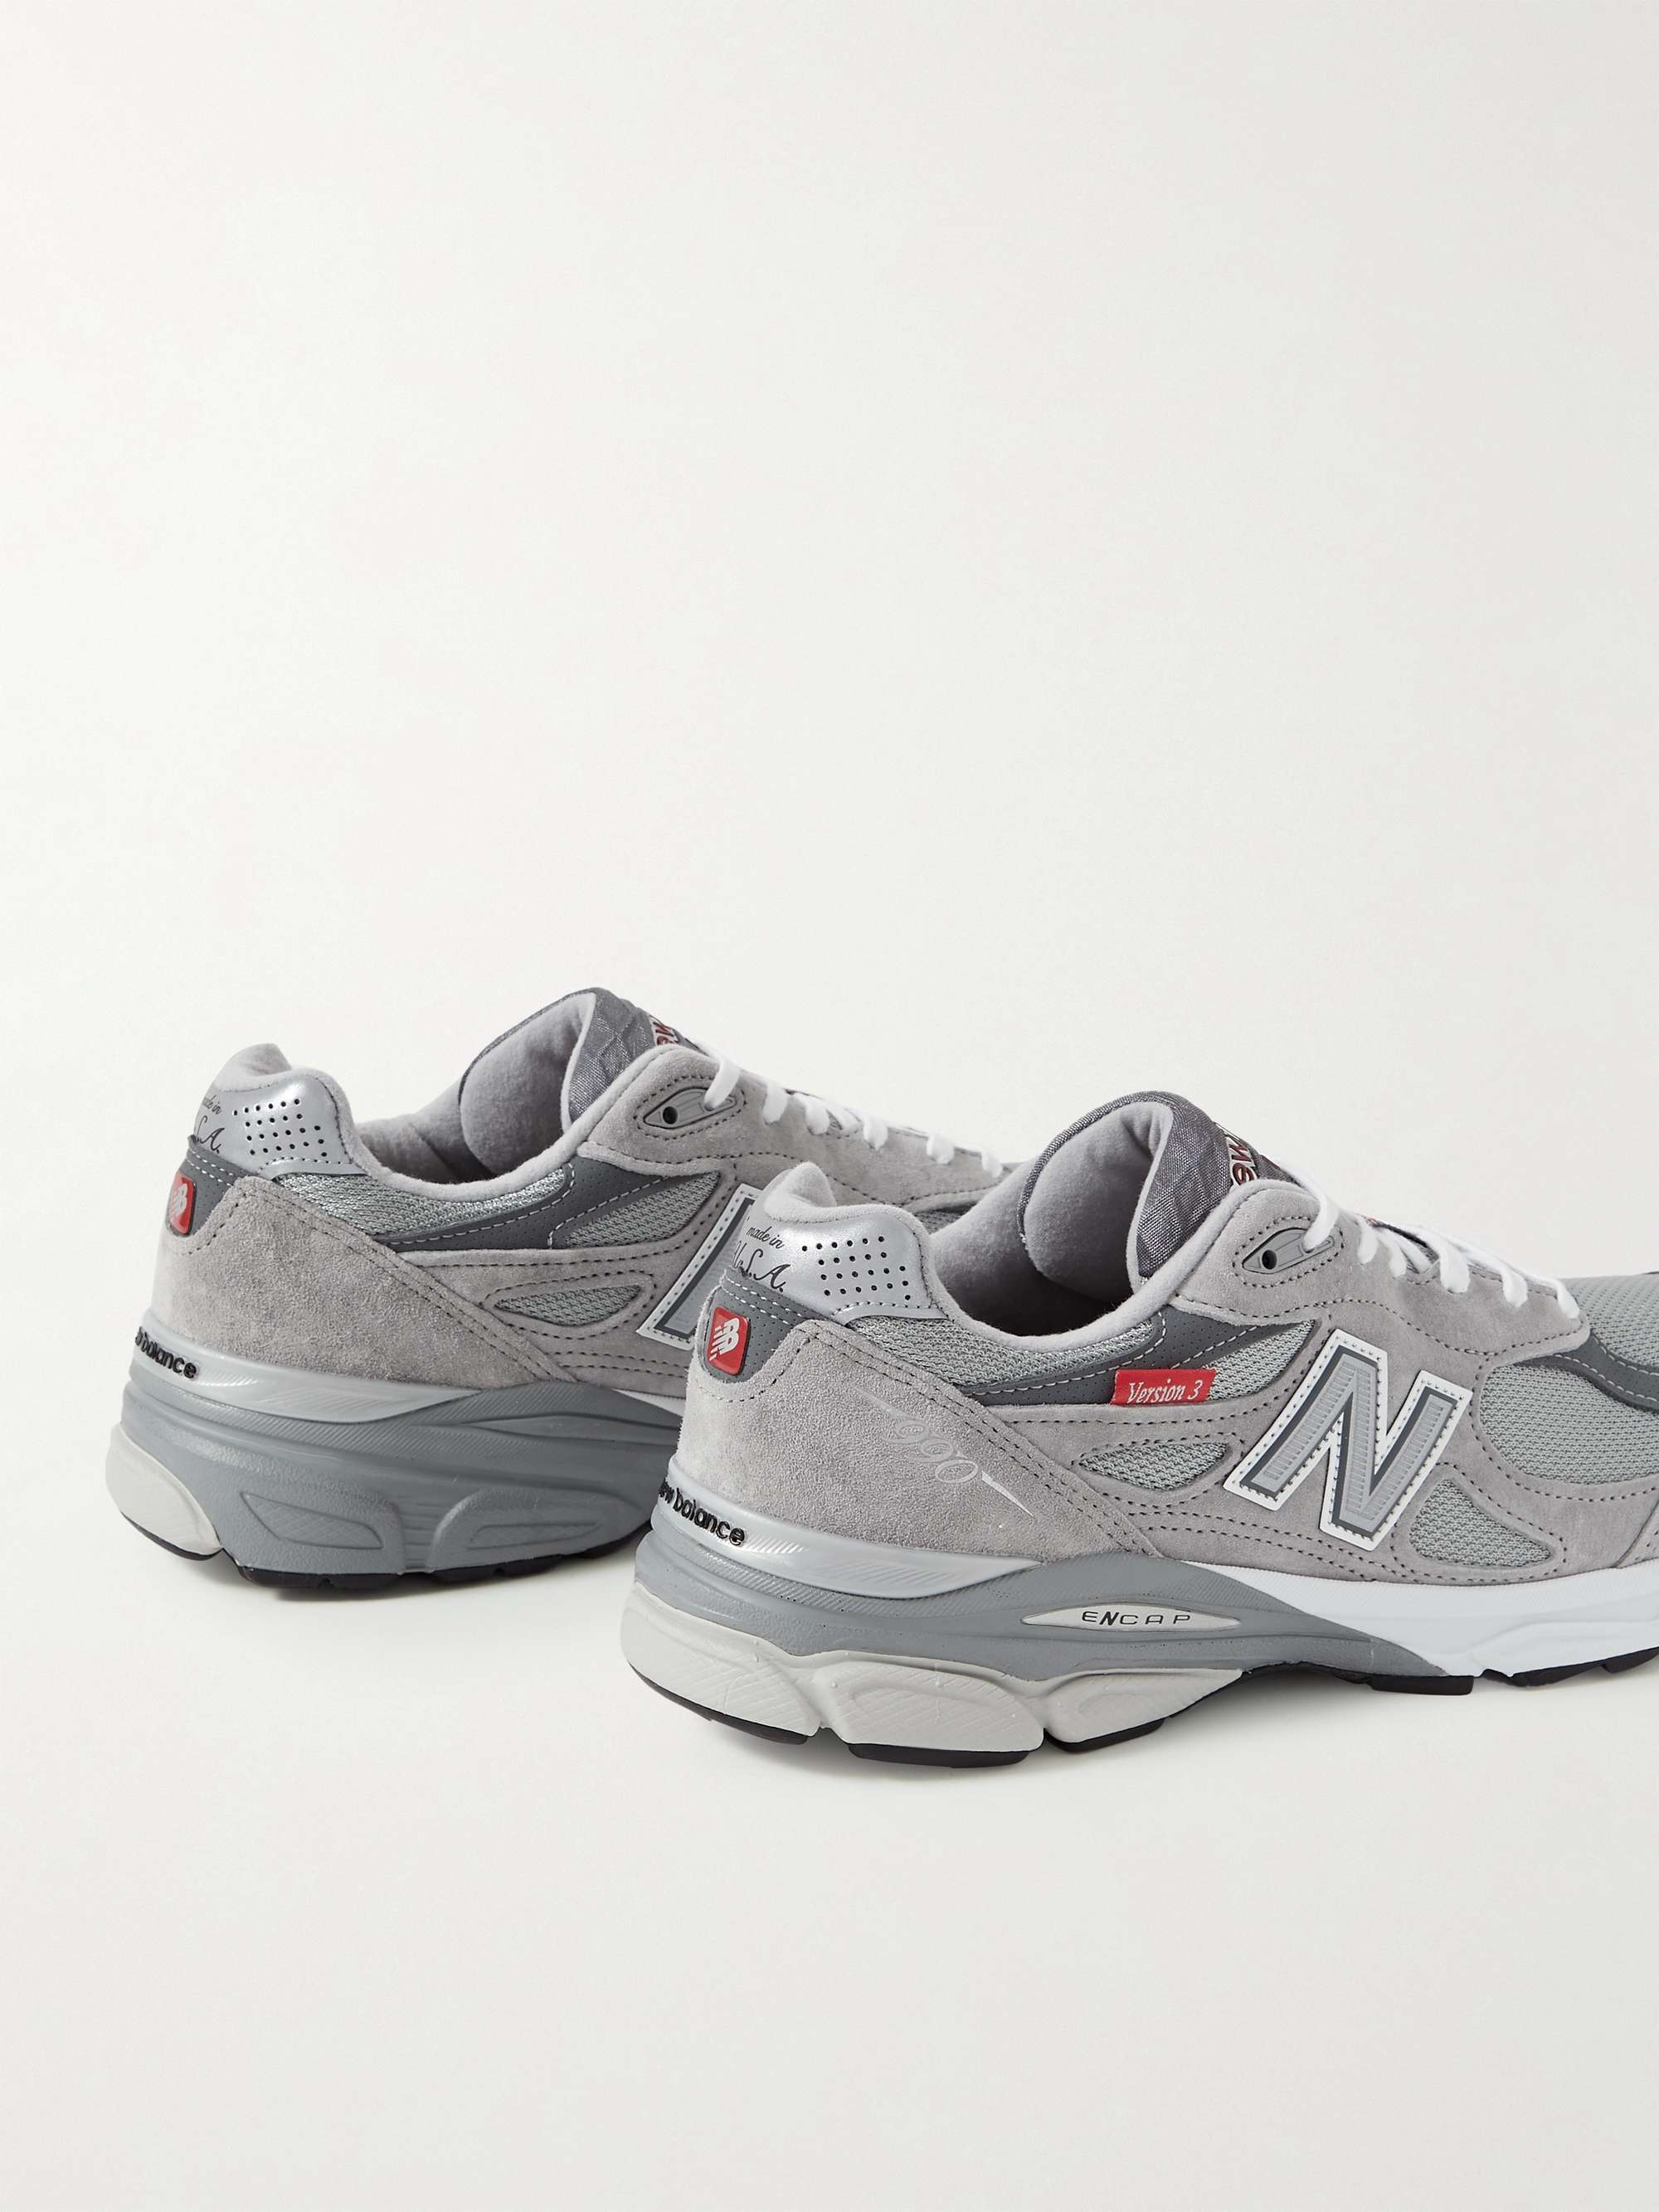 NEW BALANCE 990v3 Suede and Mesh Sneakers